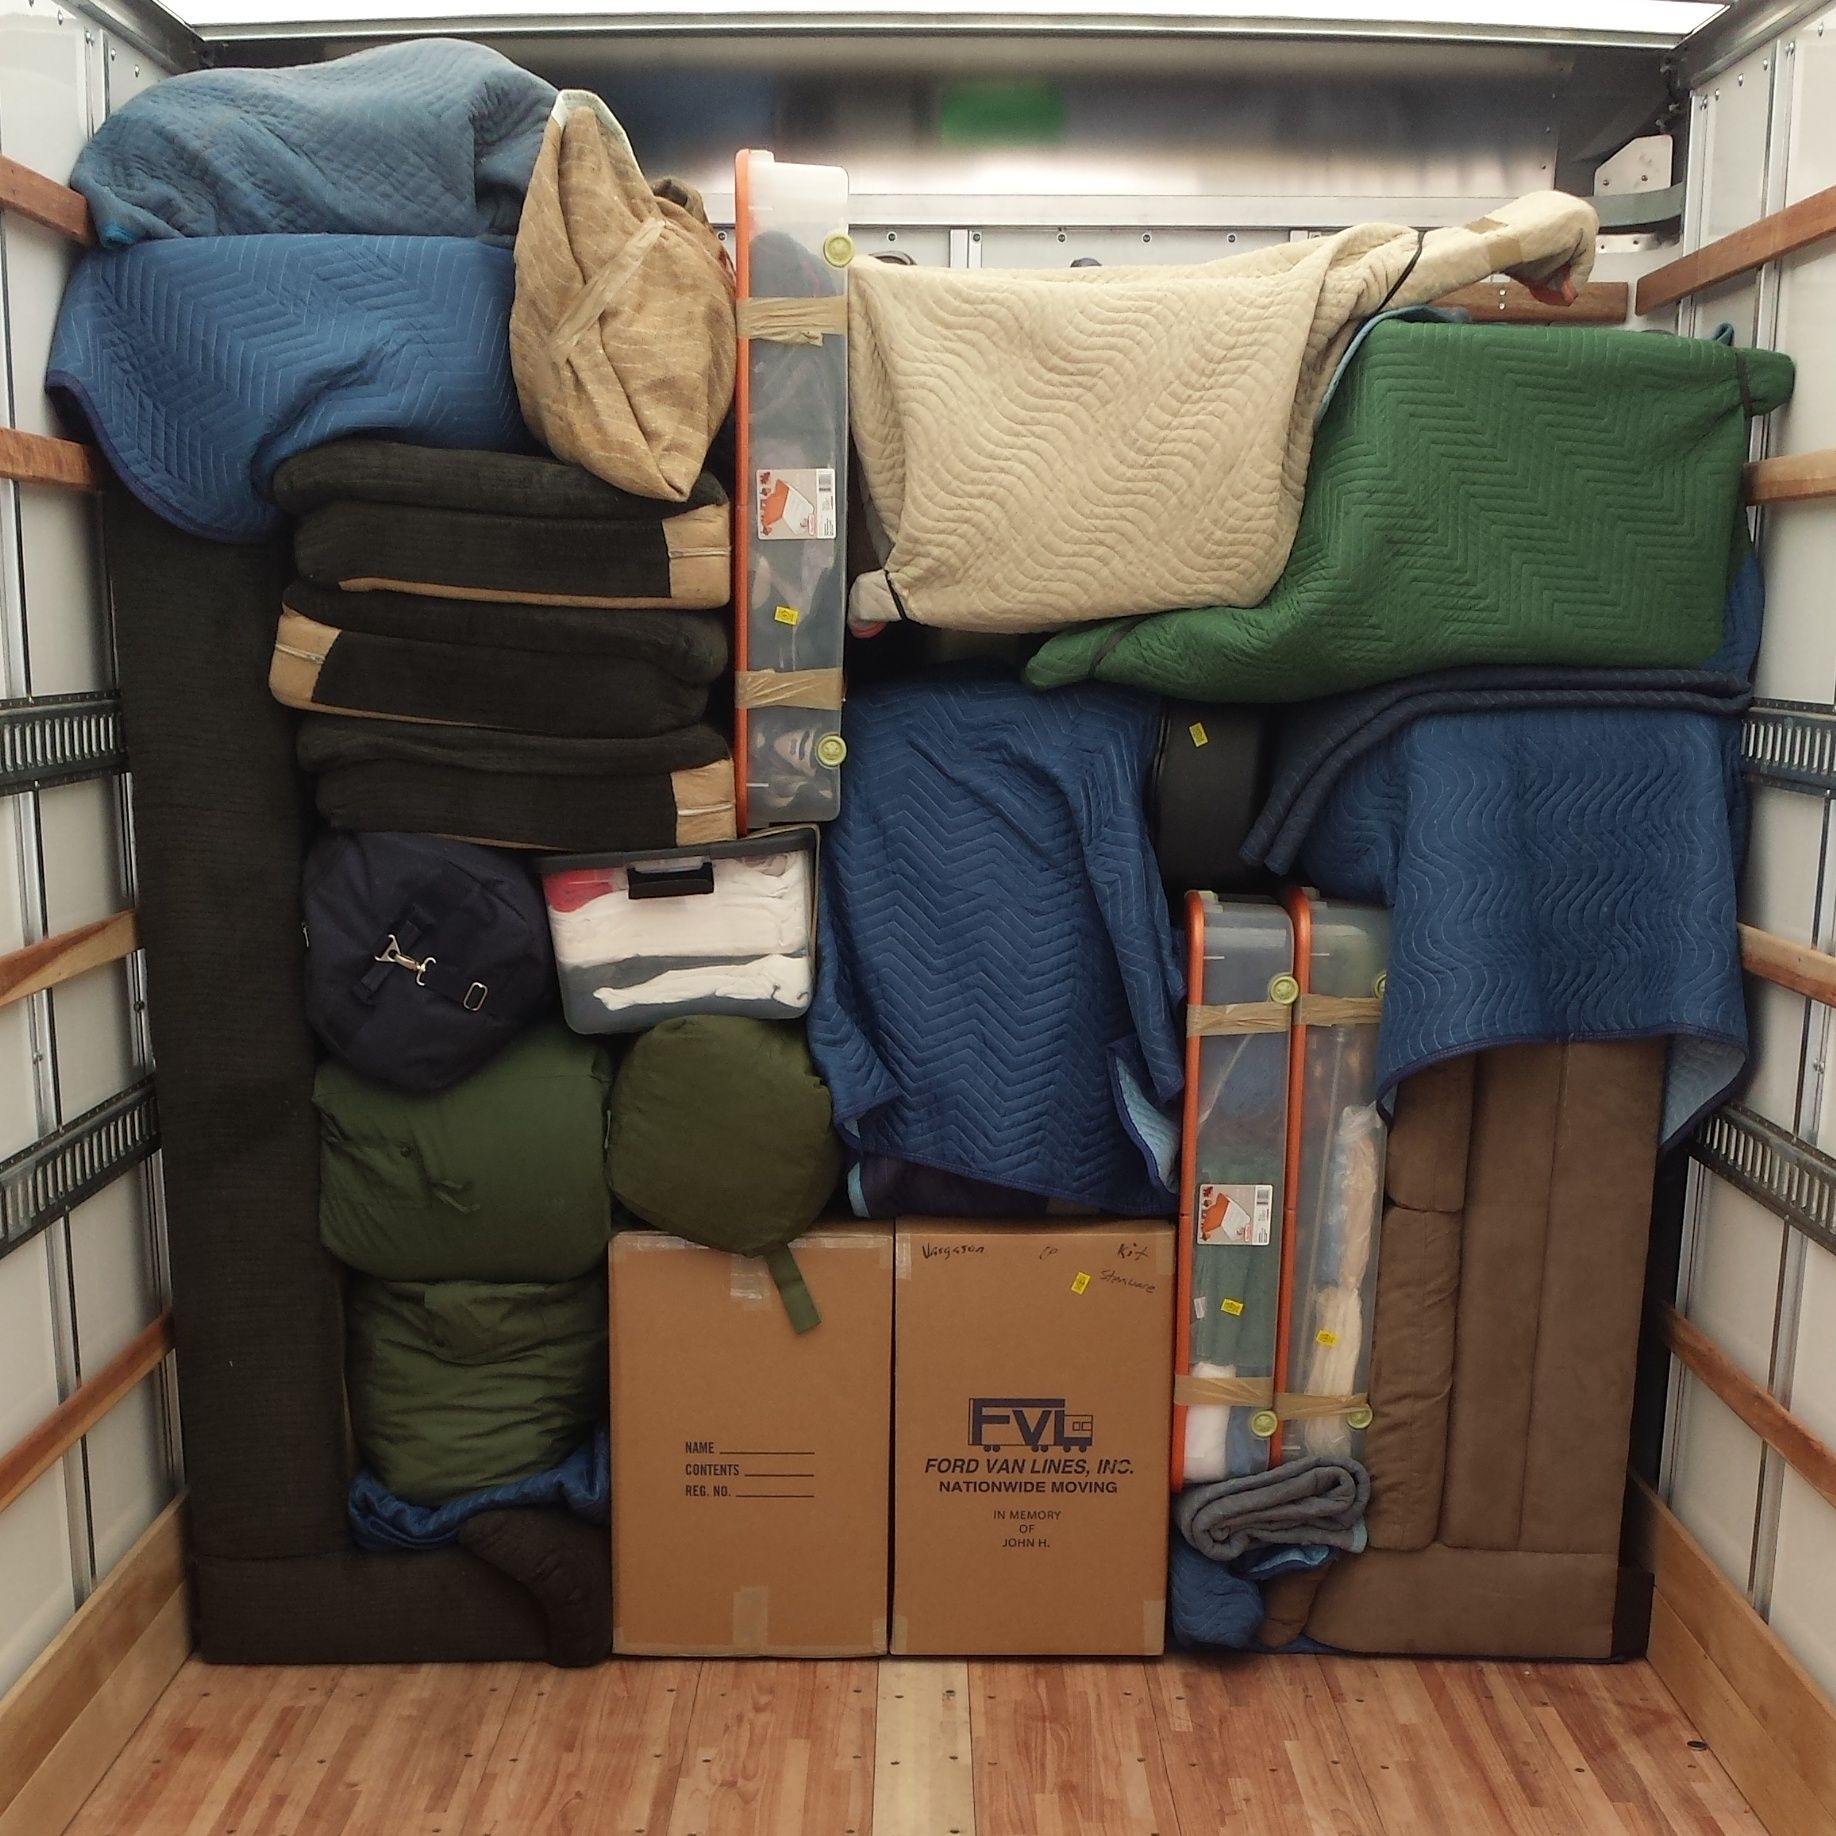 When a Tetris master moves in real life.